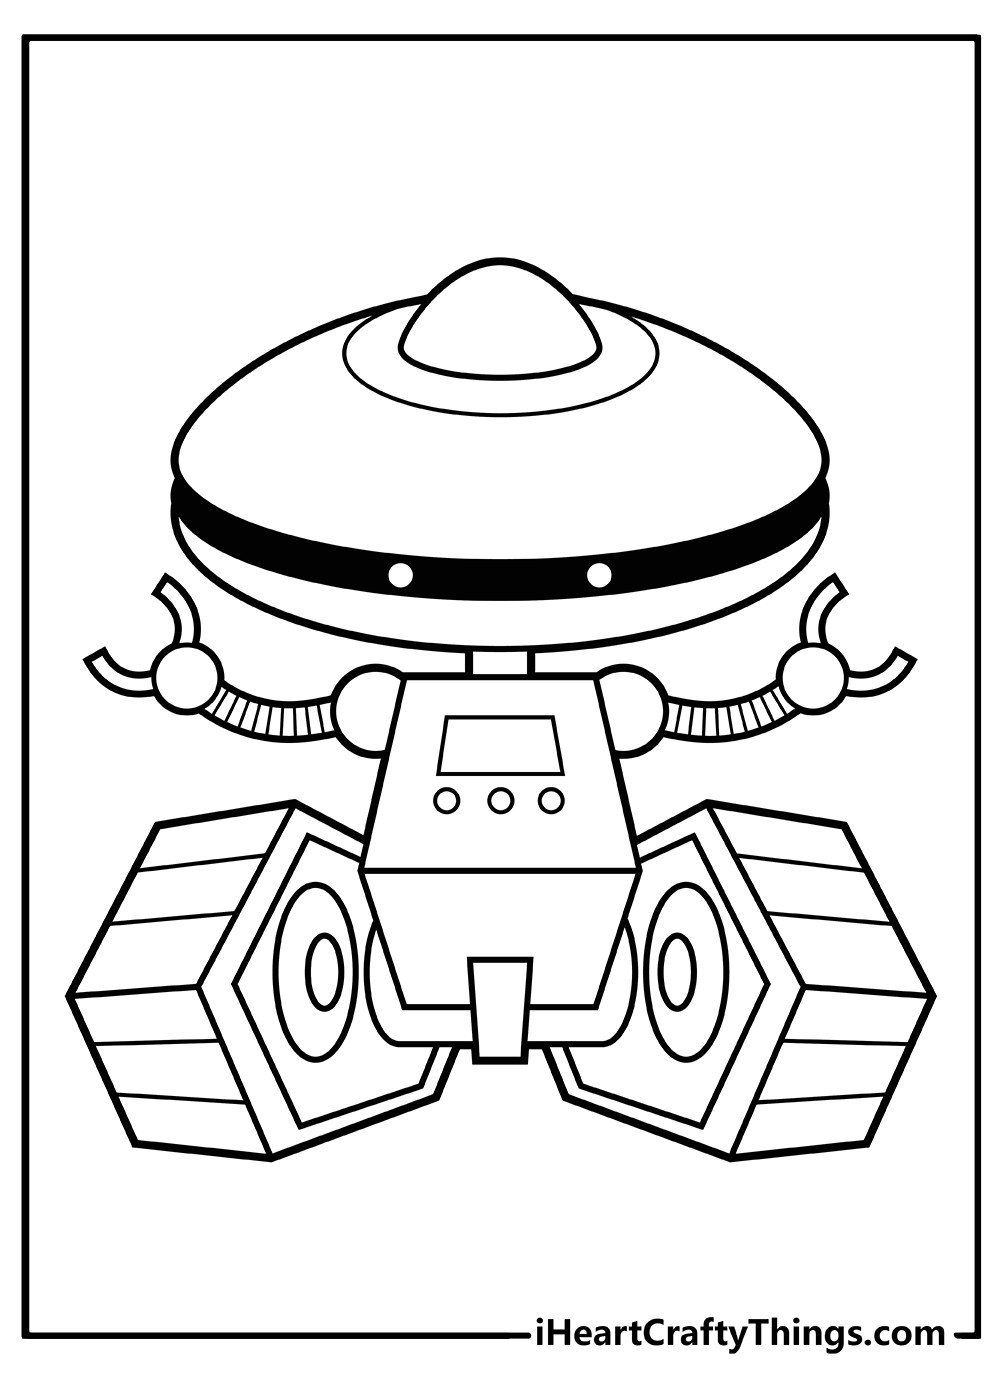 Printable Robot Coloring Pages Updated 20